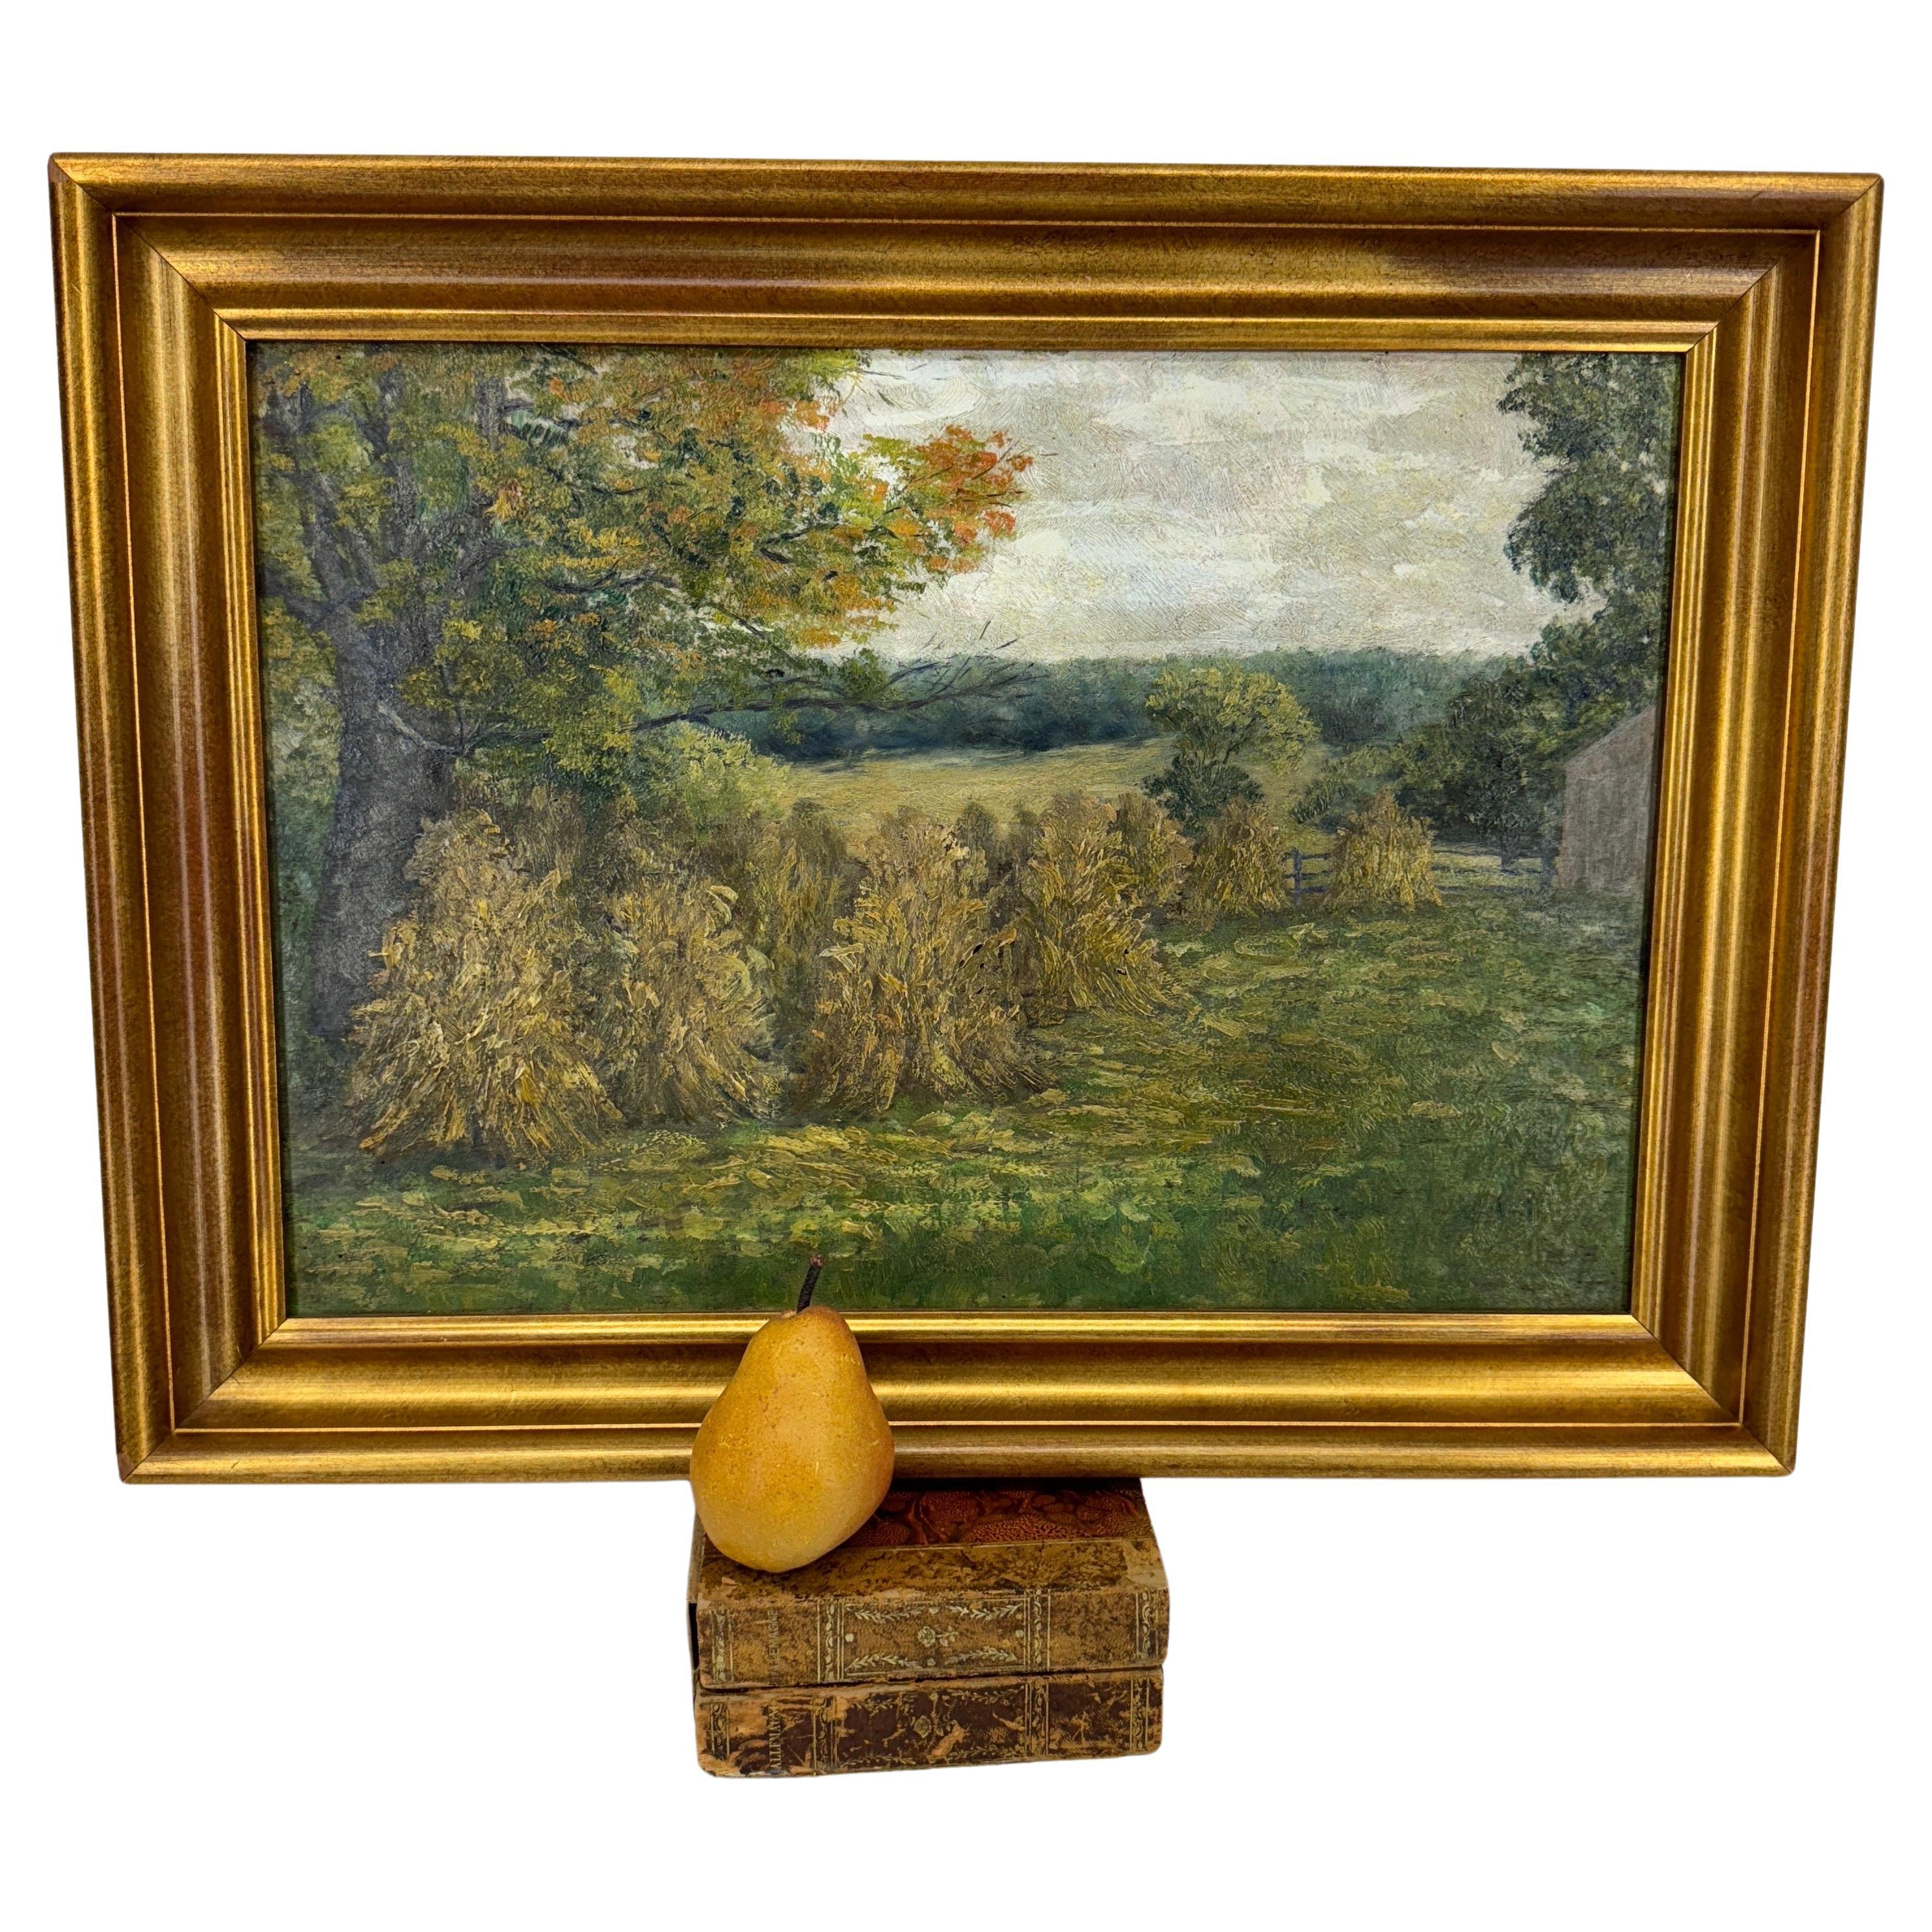 Early 20th Century Framed Landscape with Haystacks, France

A beautiful European painting on board depicting a bucolic landscape with haystacks at the forefront. Lush green landscape with trees, a split rail fence and a quaint house has been